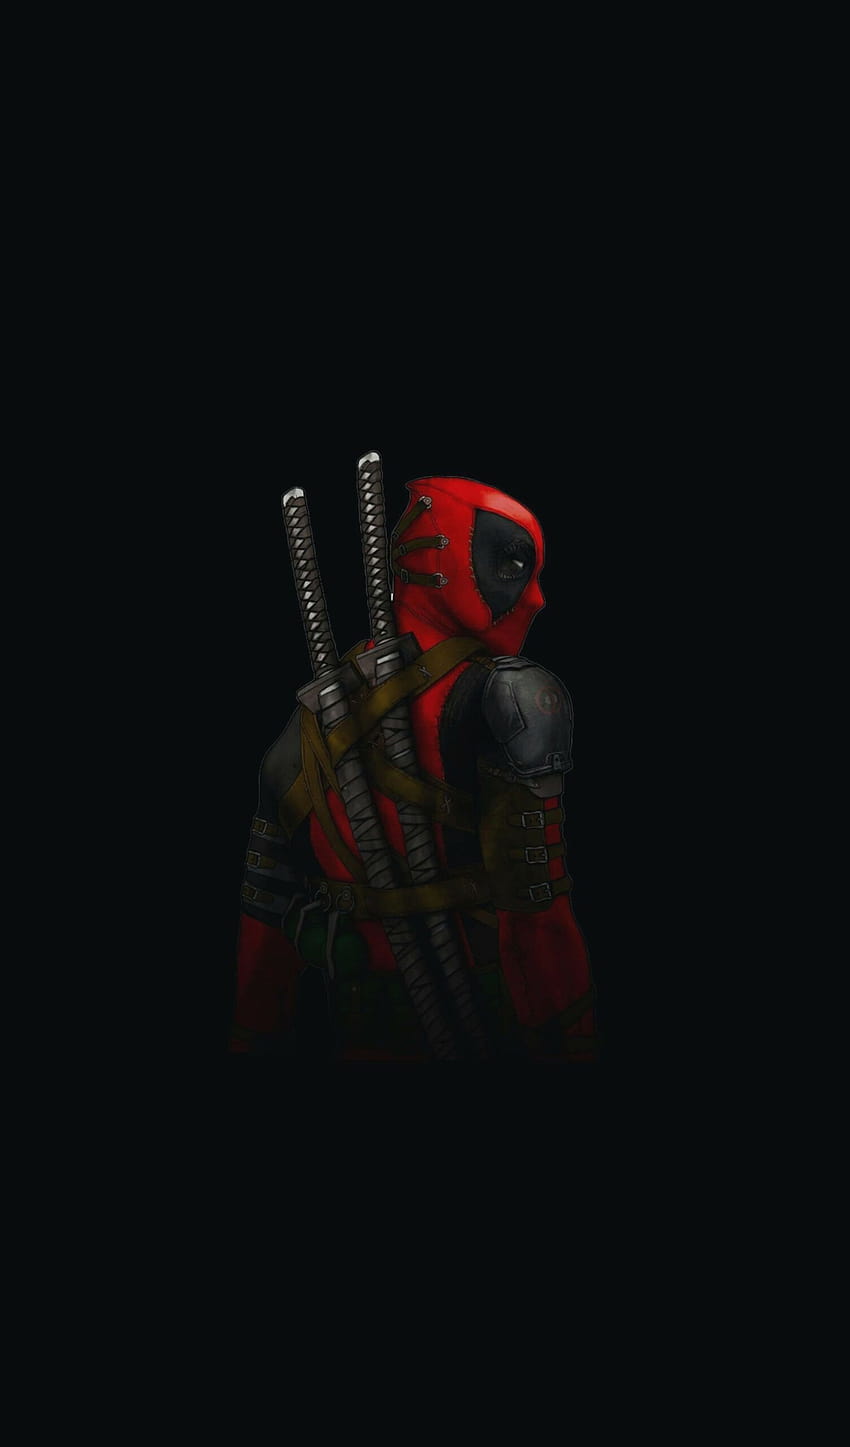 Awesome Deadpool Darkness And, deadpool amoled iphone HD phone wallpaper